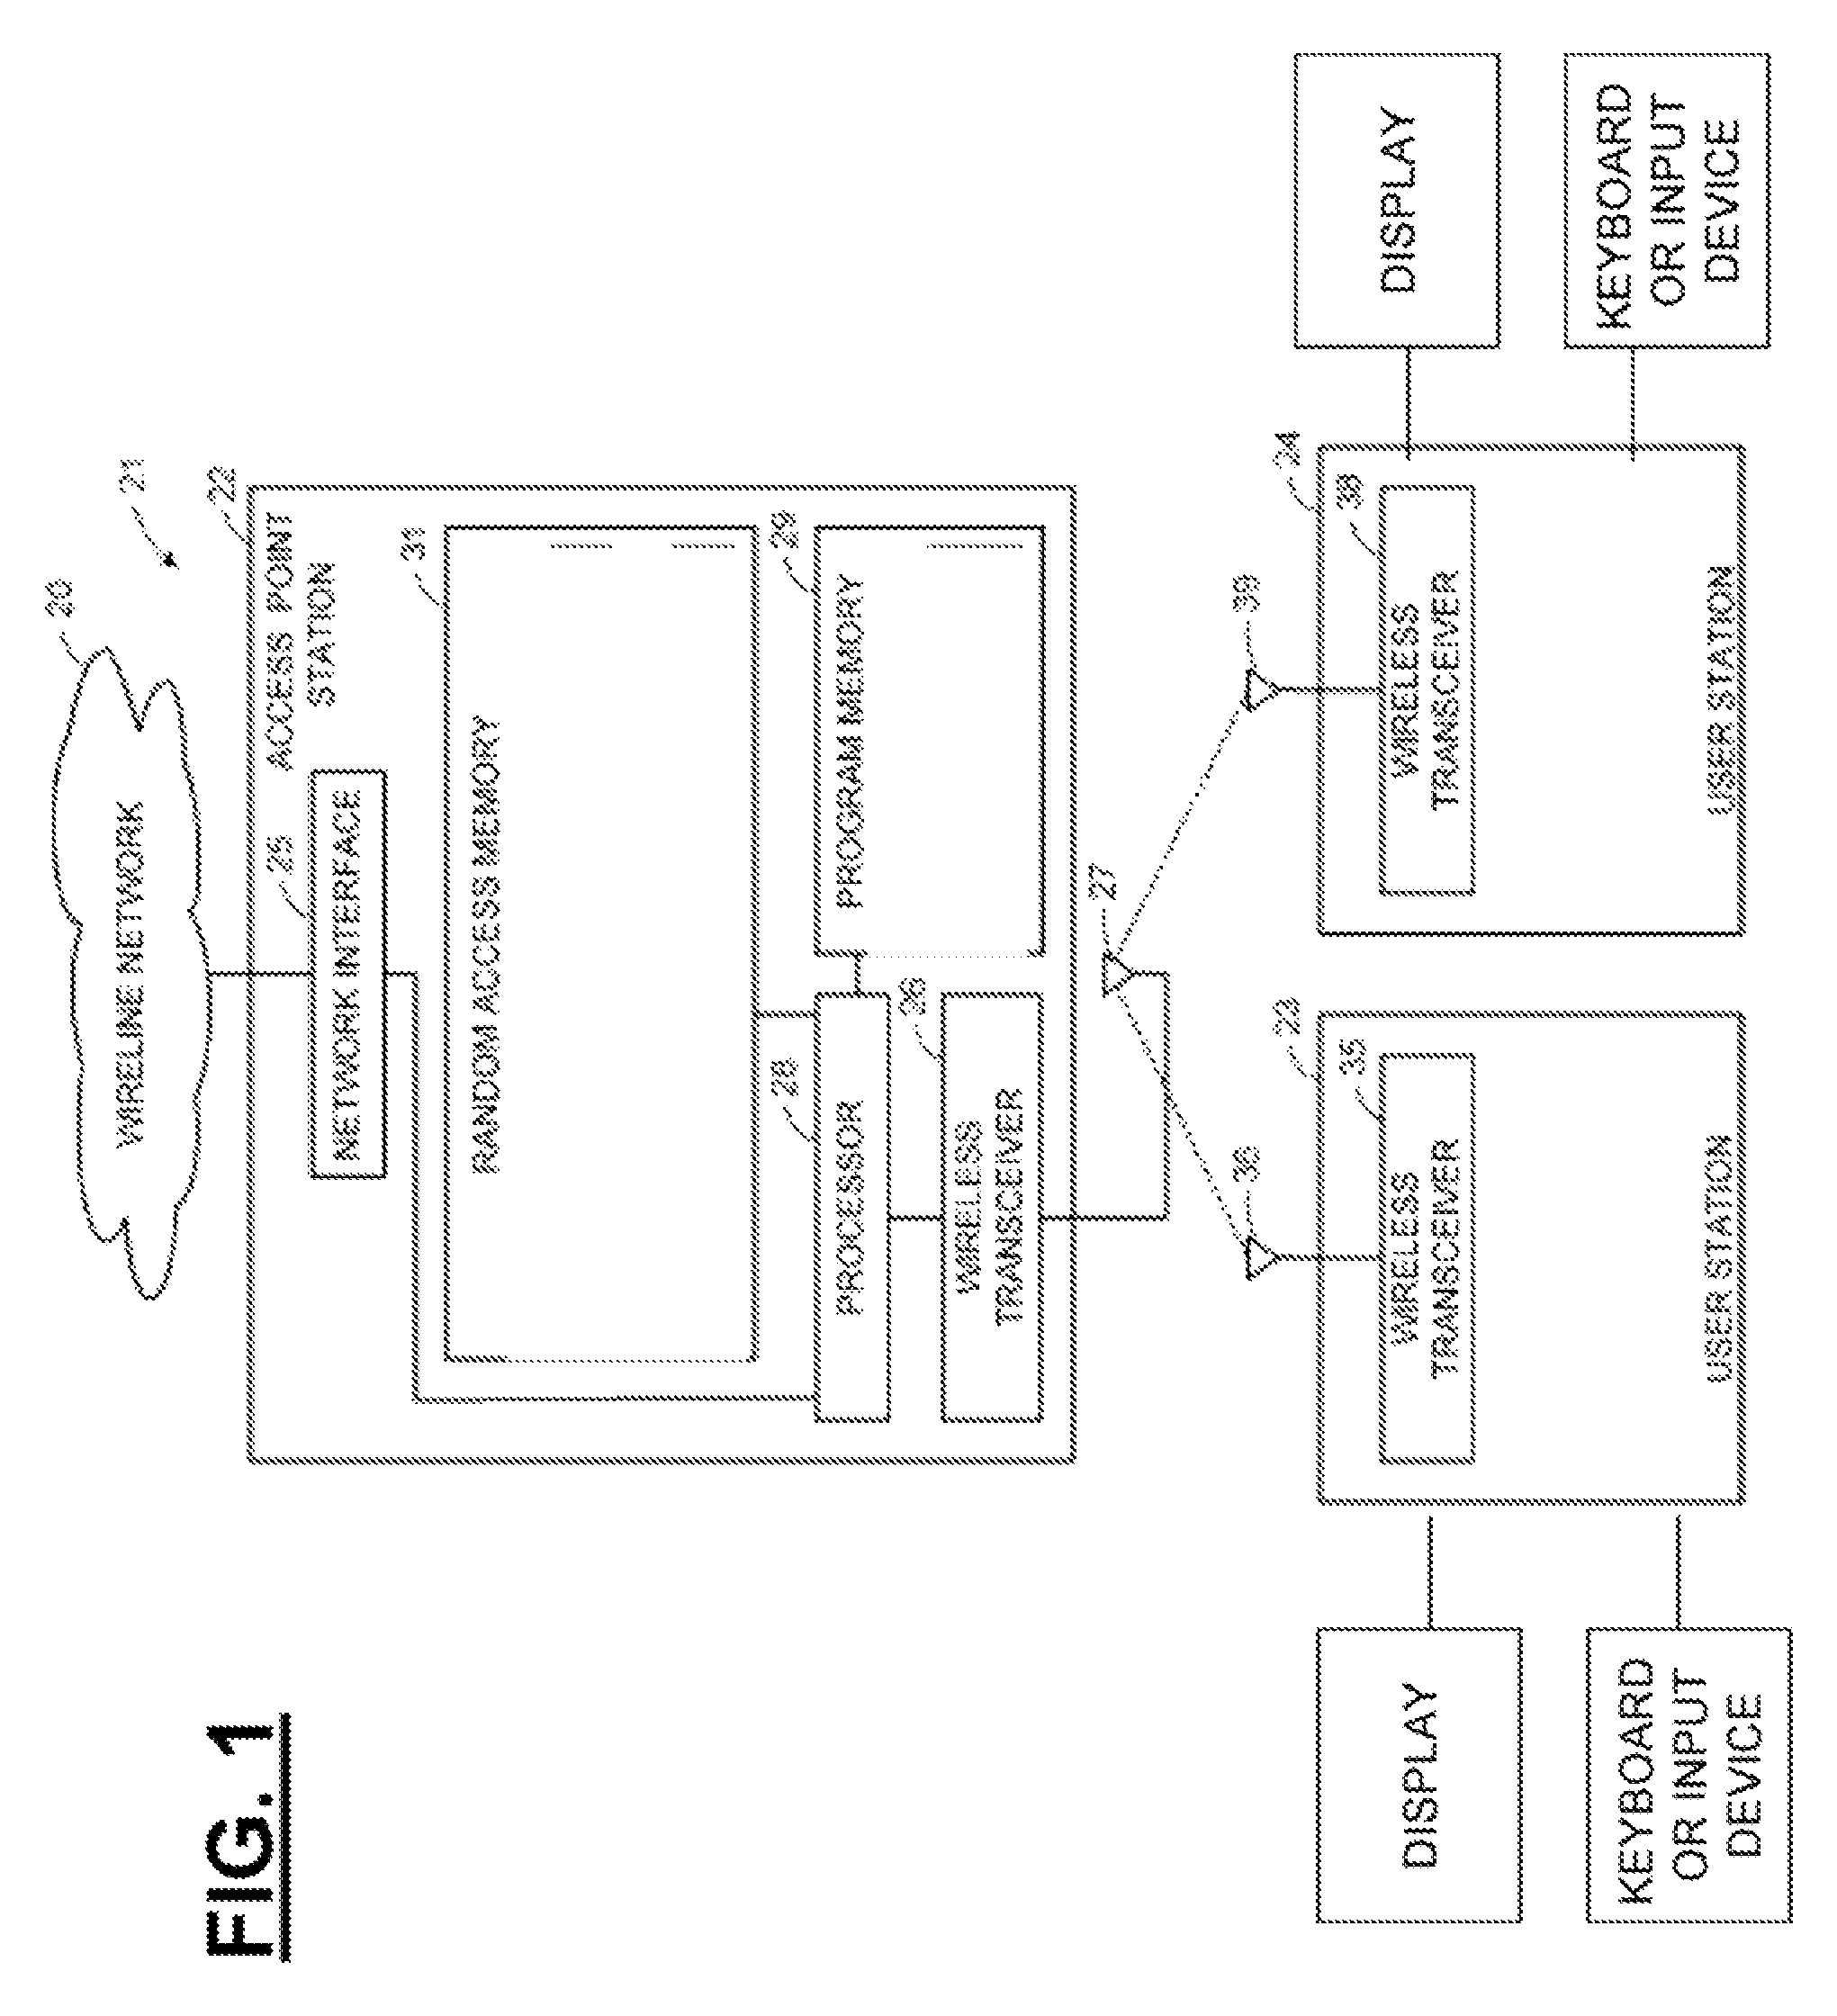 Distribution of session keys to the selected multiple access points based on geo-location of APs